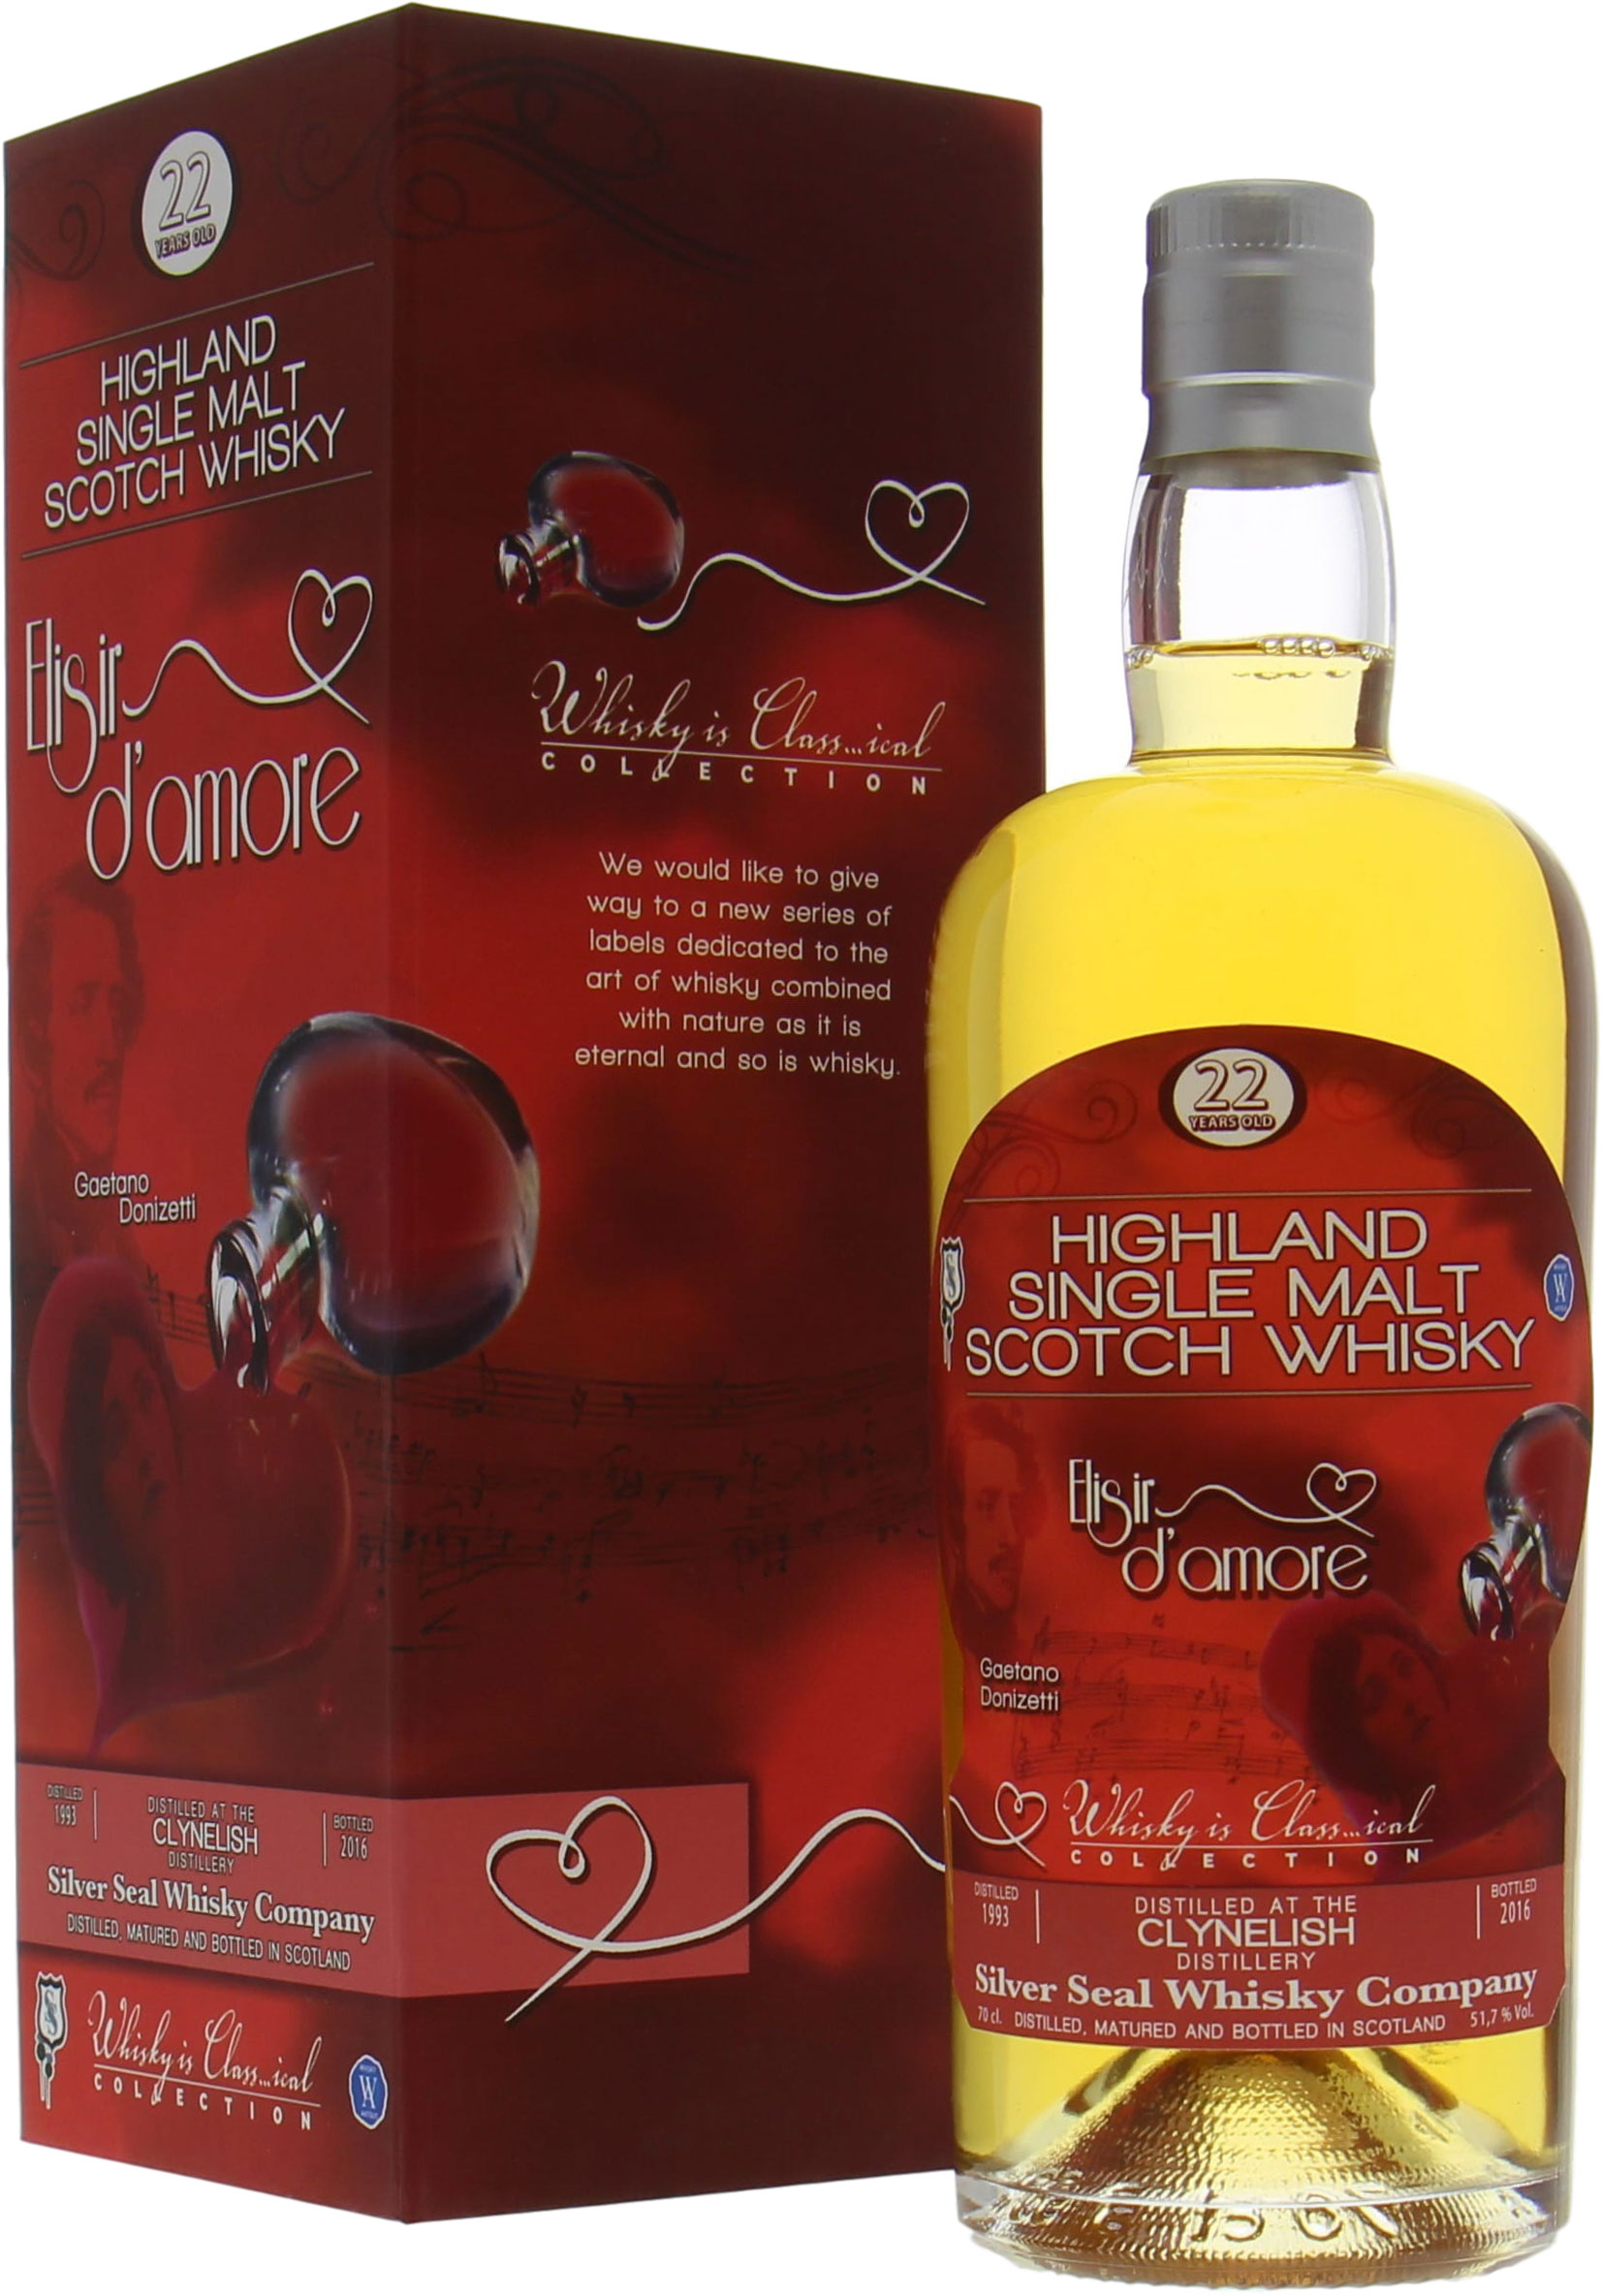 Clynelish - 22 Years Silver Seal Gaetano Donizetti Elisir d'amore Cask:7562 51.7% 1993 In Original Container